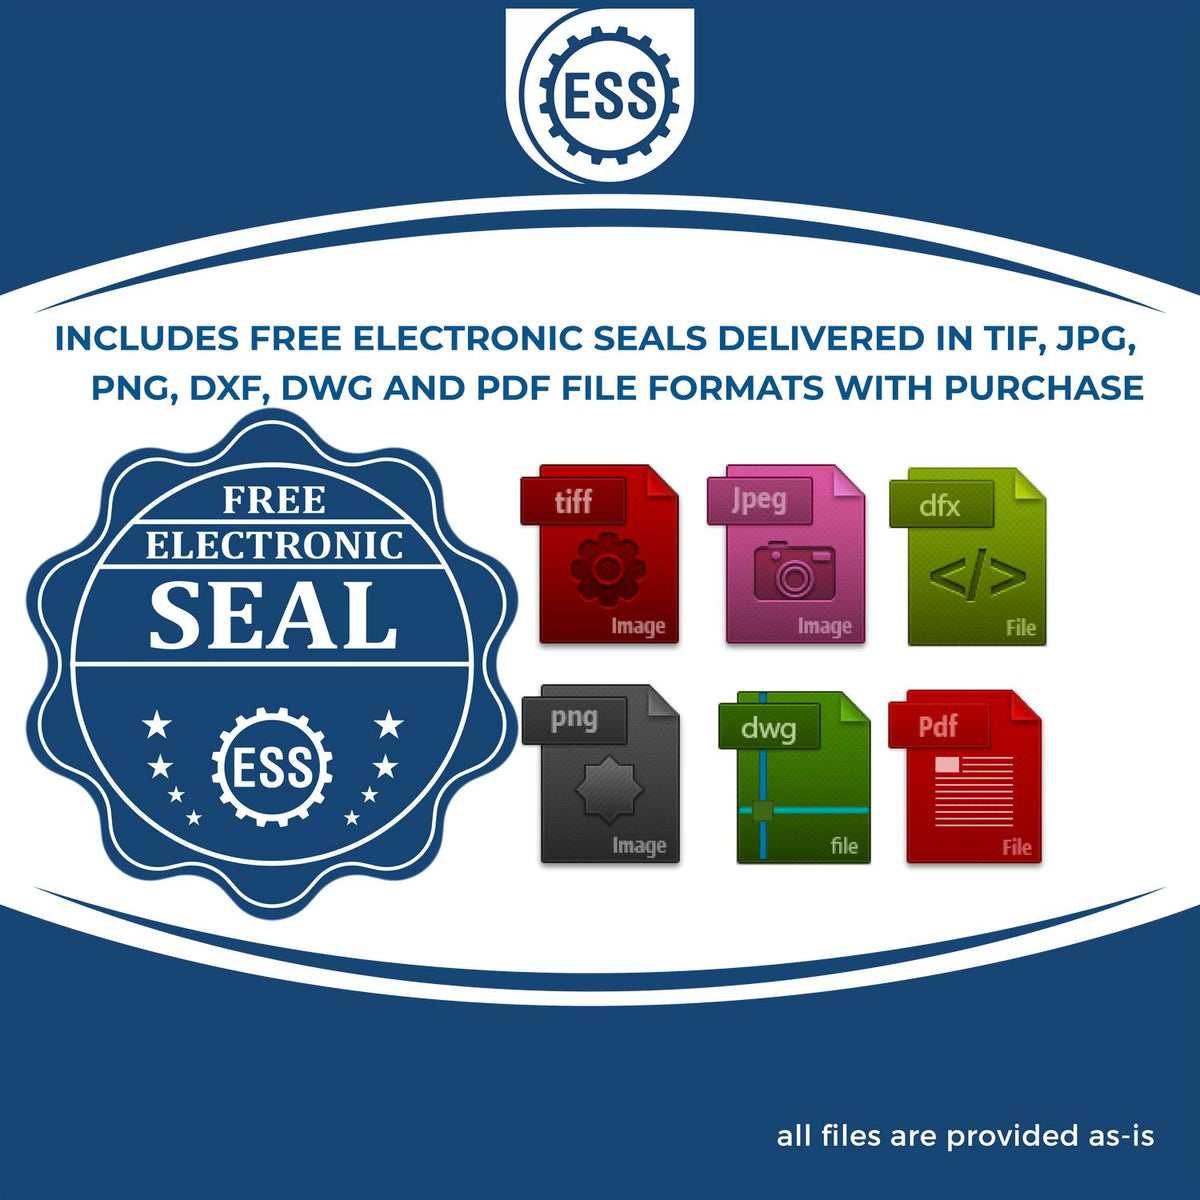 An infographic for the free electronic seal for the Self-Inking Maryland Landscape Architect Stamp illustrating the different file type icons such as DXF, DWG, TIF, JPG and PNG.